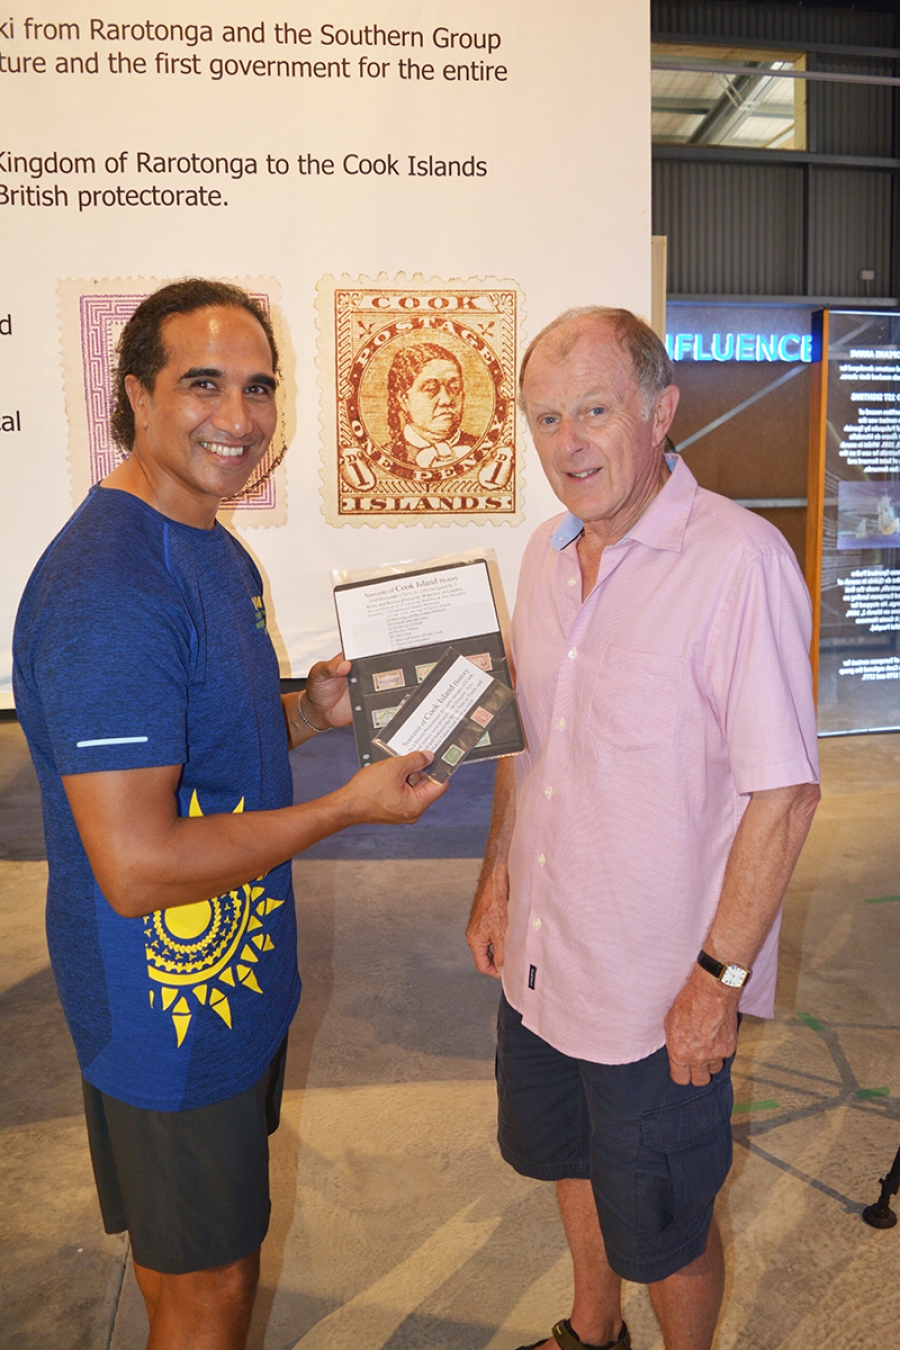 Aussie puts his stamp on local museum display